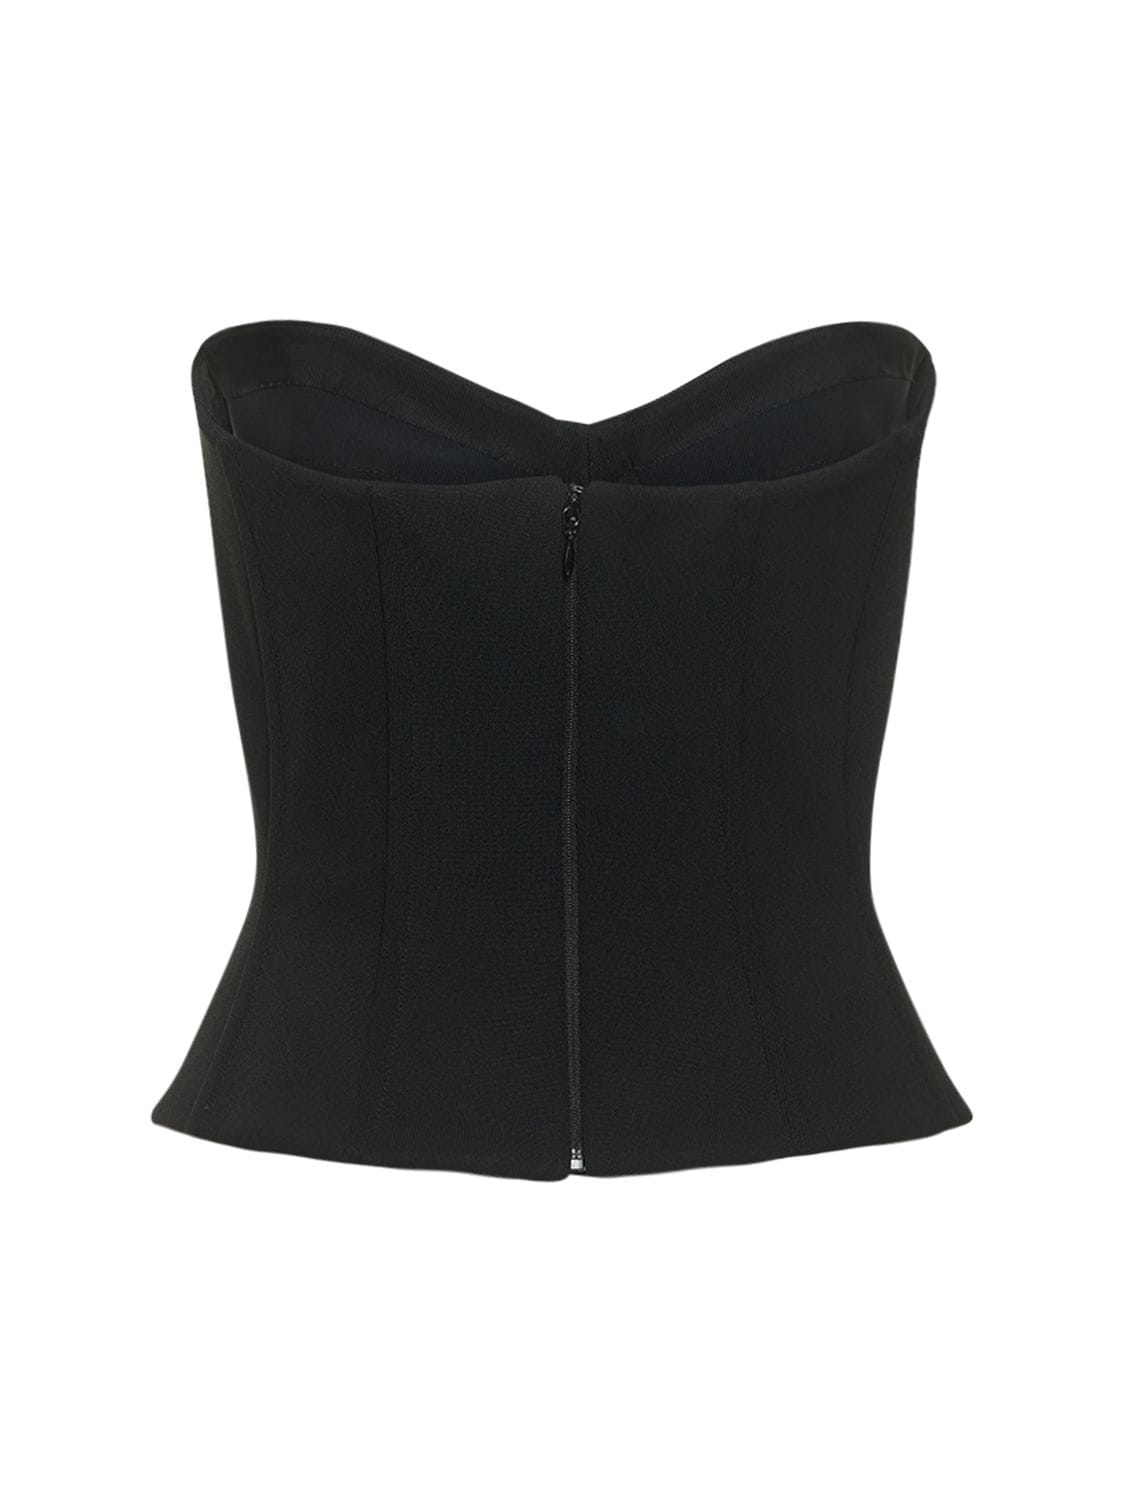 Balenciaga Strapless Washed Cotton Bustier Top in Black